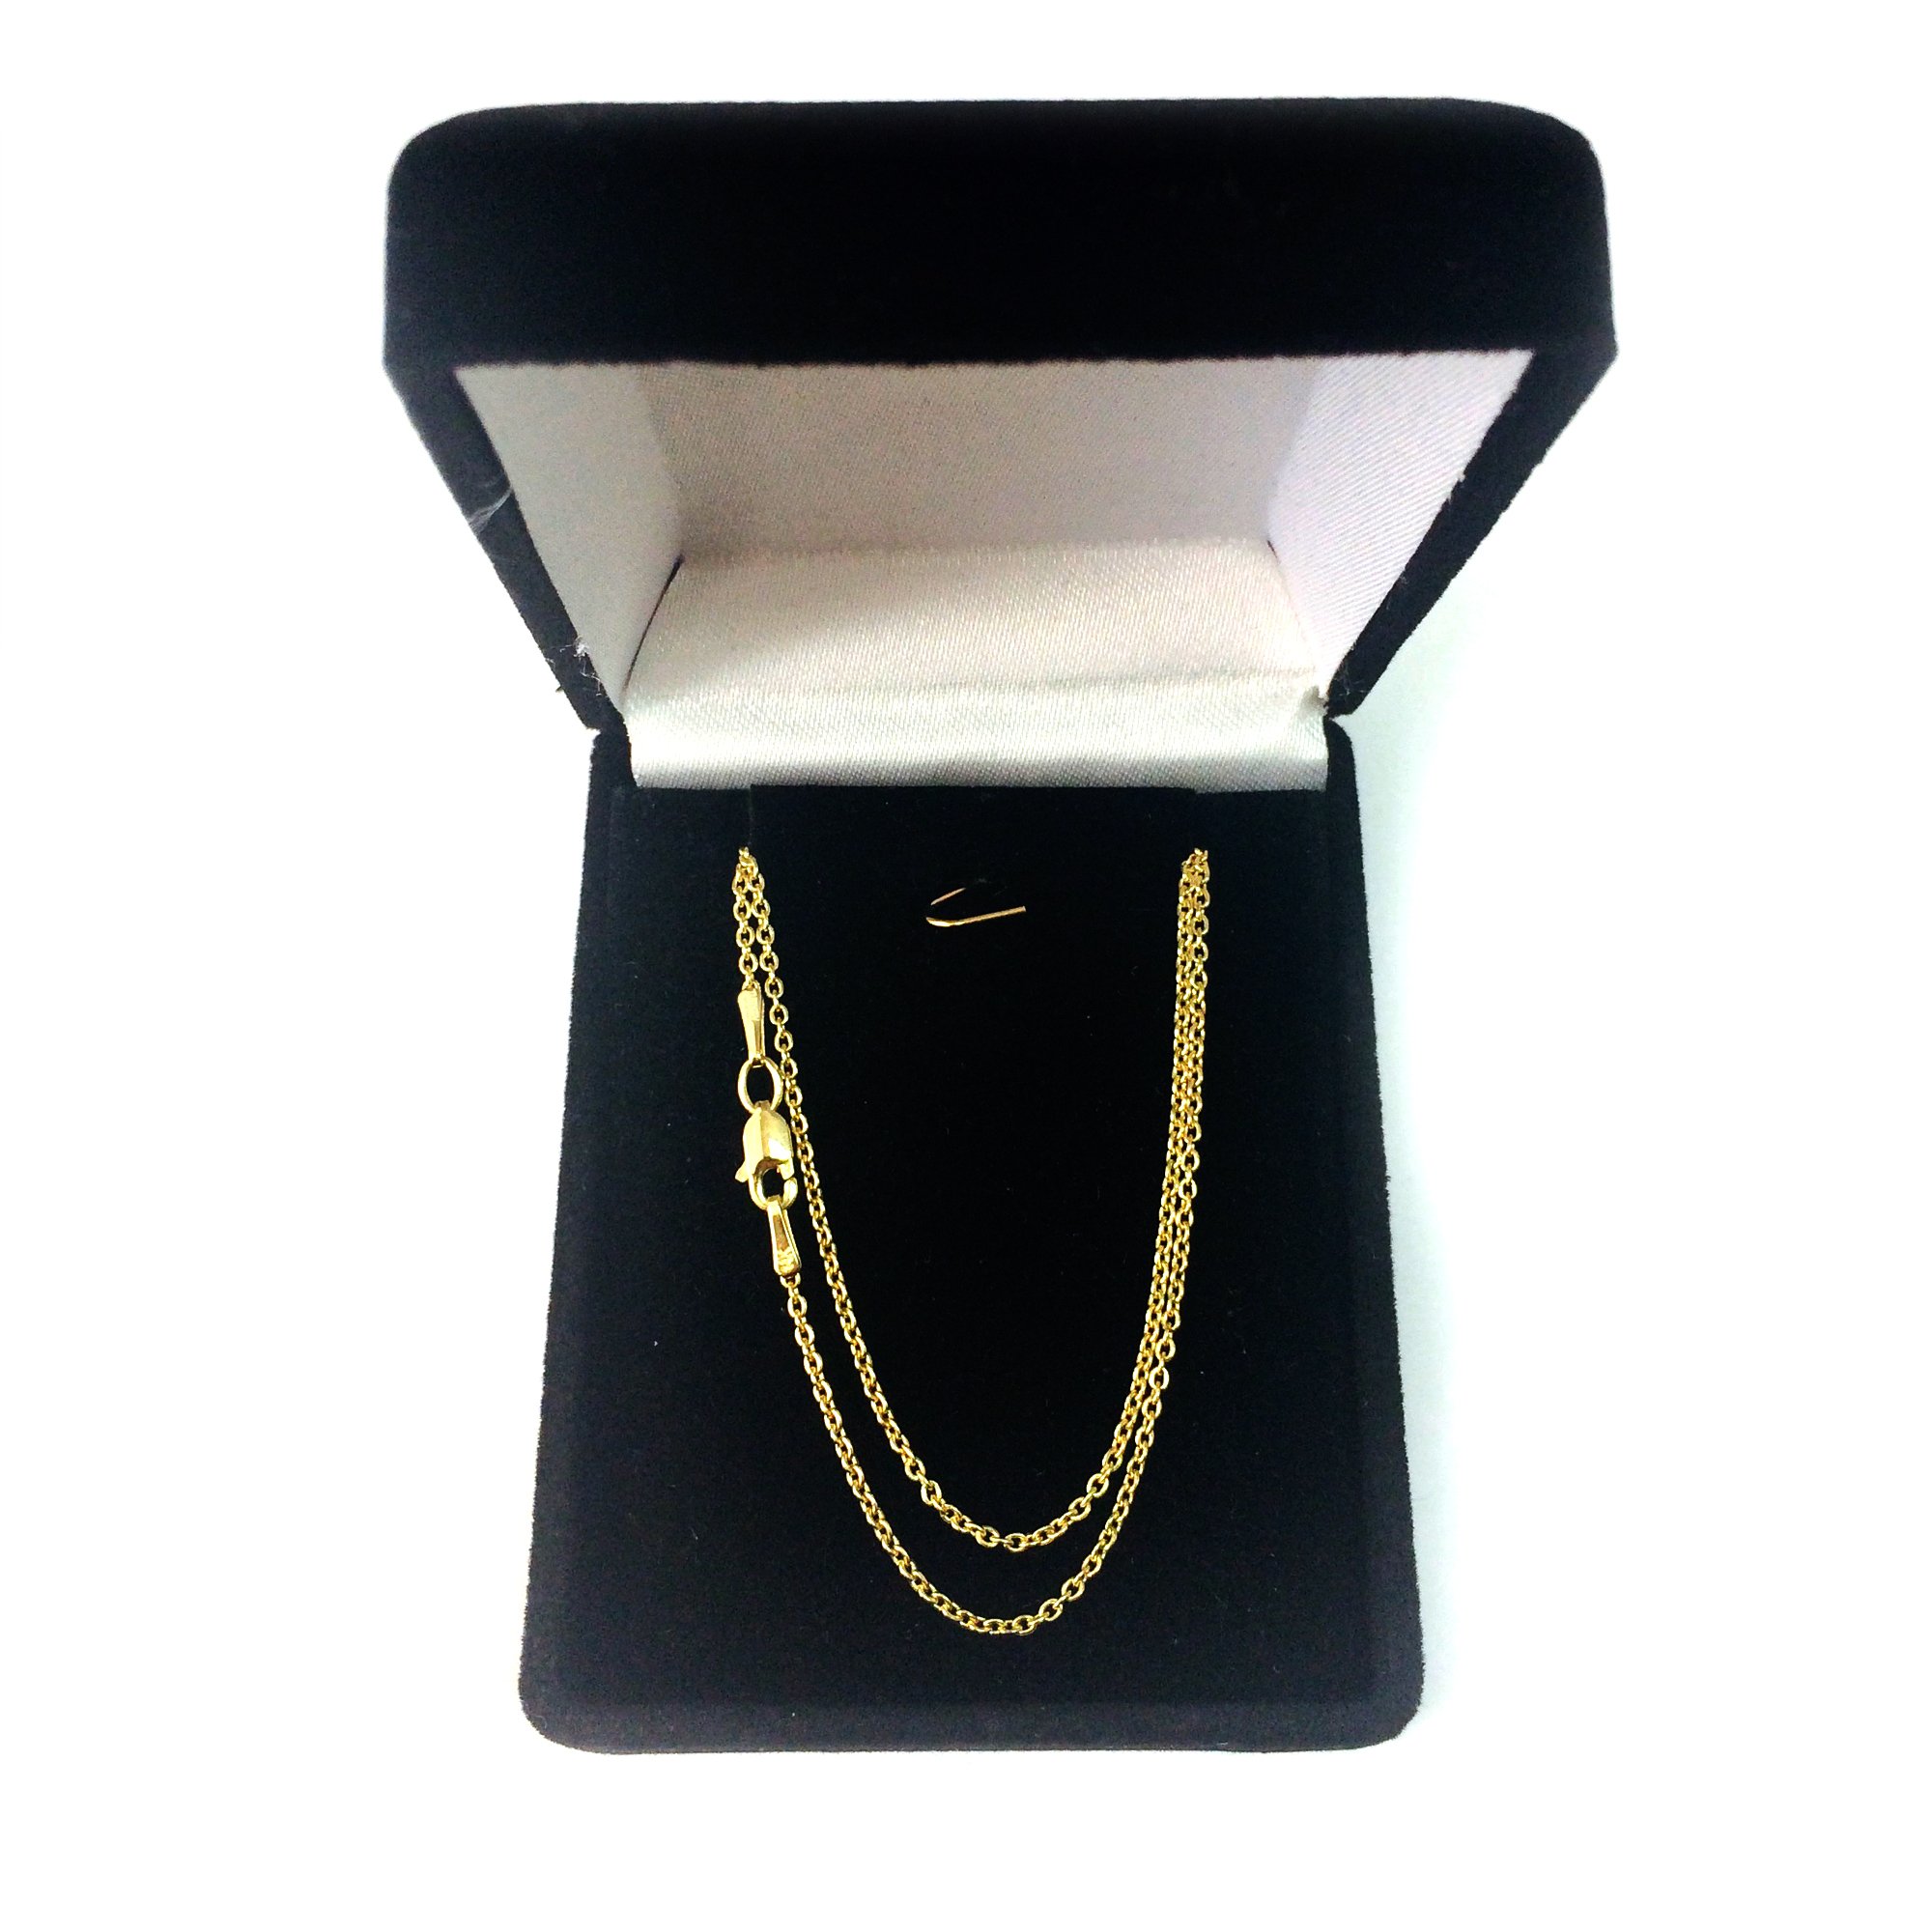 Jewelry Affairs 14k Yellow Gold Forsantina Chain Necklace, 1.5mm